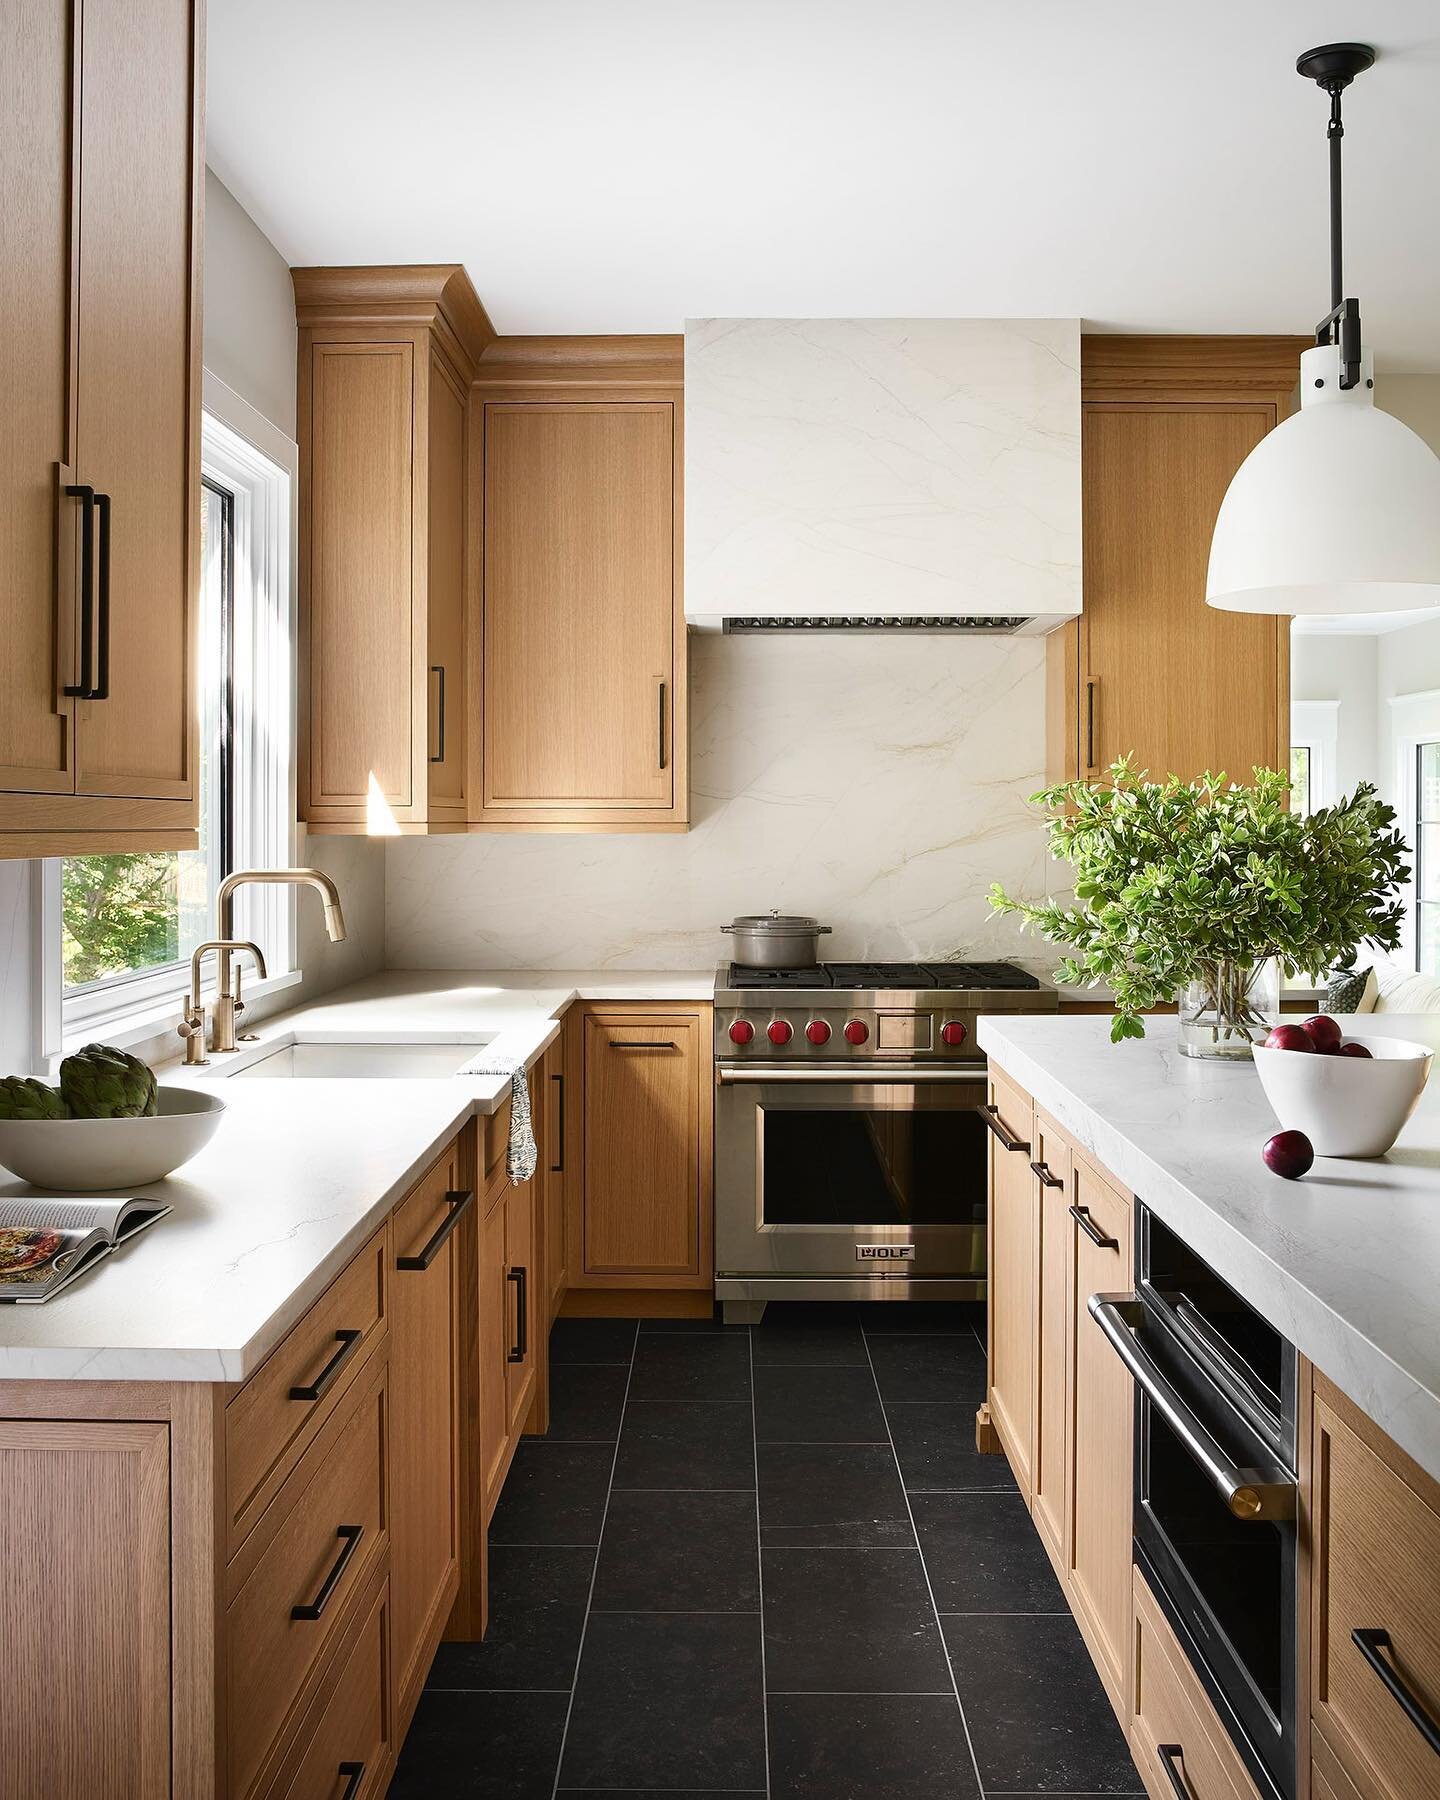 Sharing a Before and After kitchen renovation: we combined the breakfast room and kitchen, tiled the floors with heat to keep feet warm, and kept the palette warm, but simple. Appliances are hidden where necessary to highlight the white oak  cabinetr